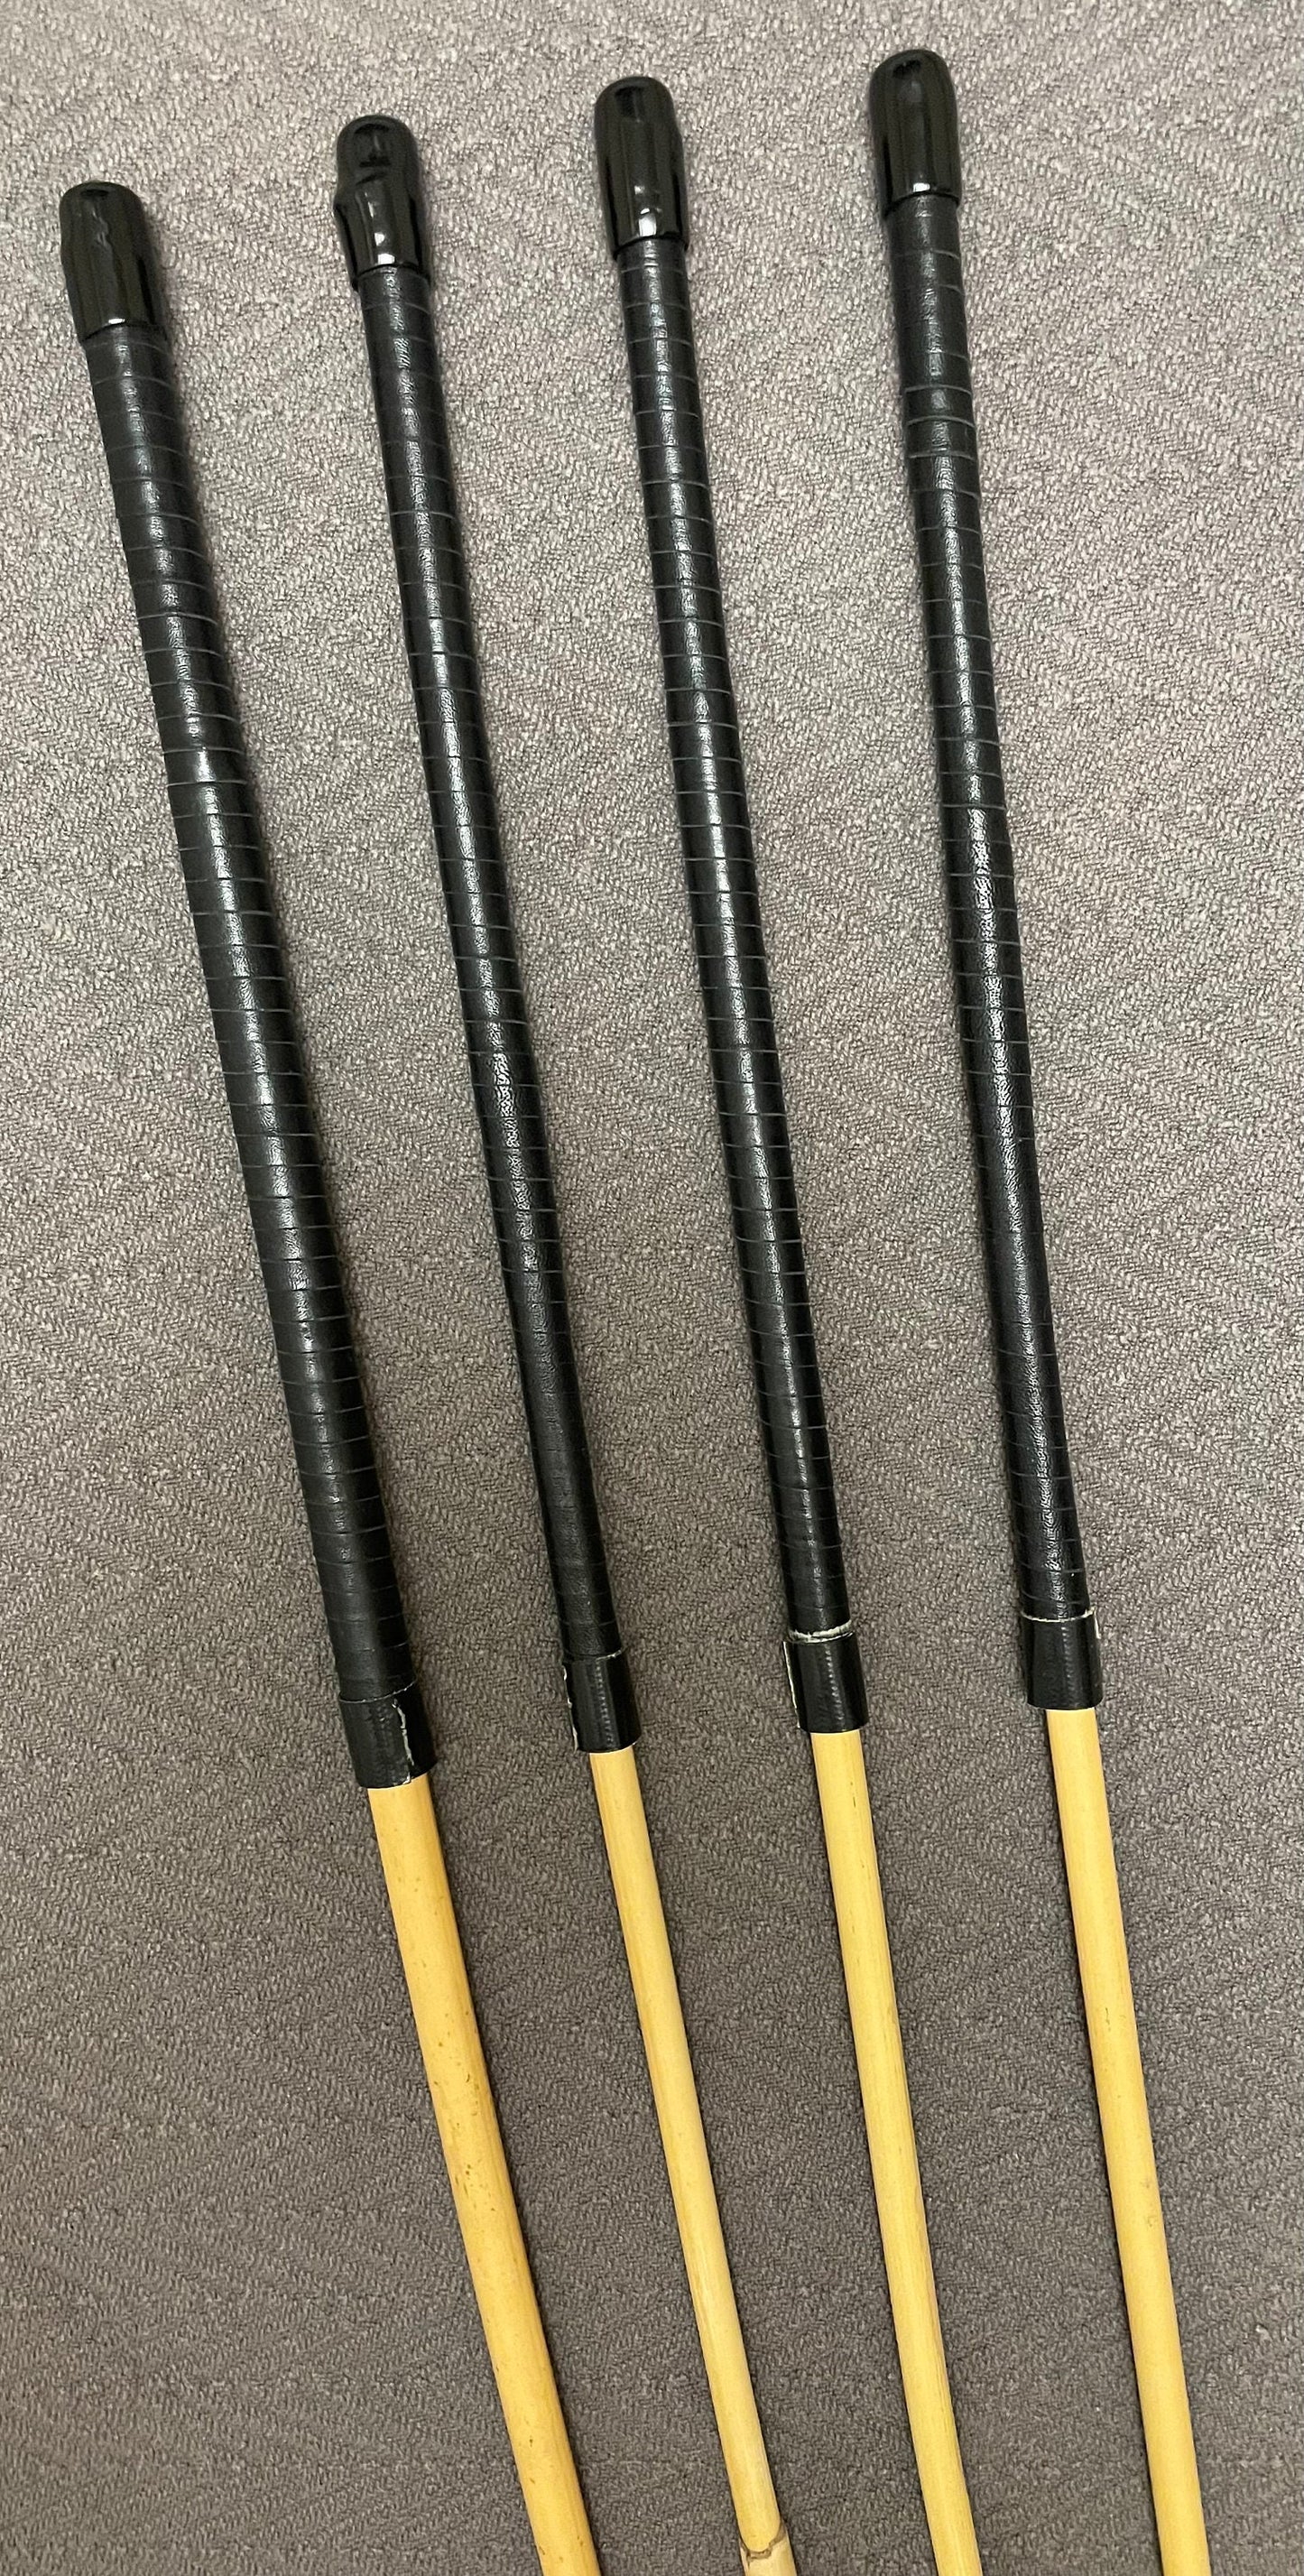 Pro Disciplinarian Set of 4 Classic Dragon Rattan Punishment Canes  / Whipping Canes  with Black Kangaroo Leather Handles